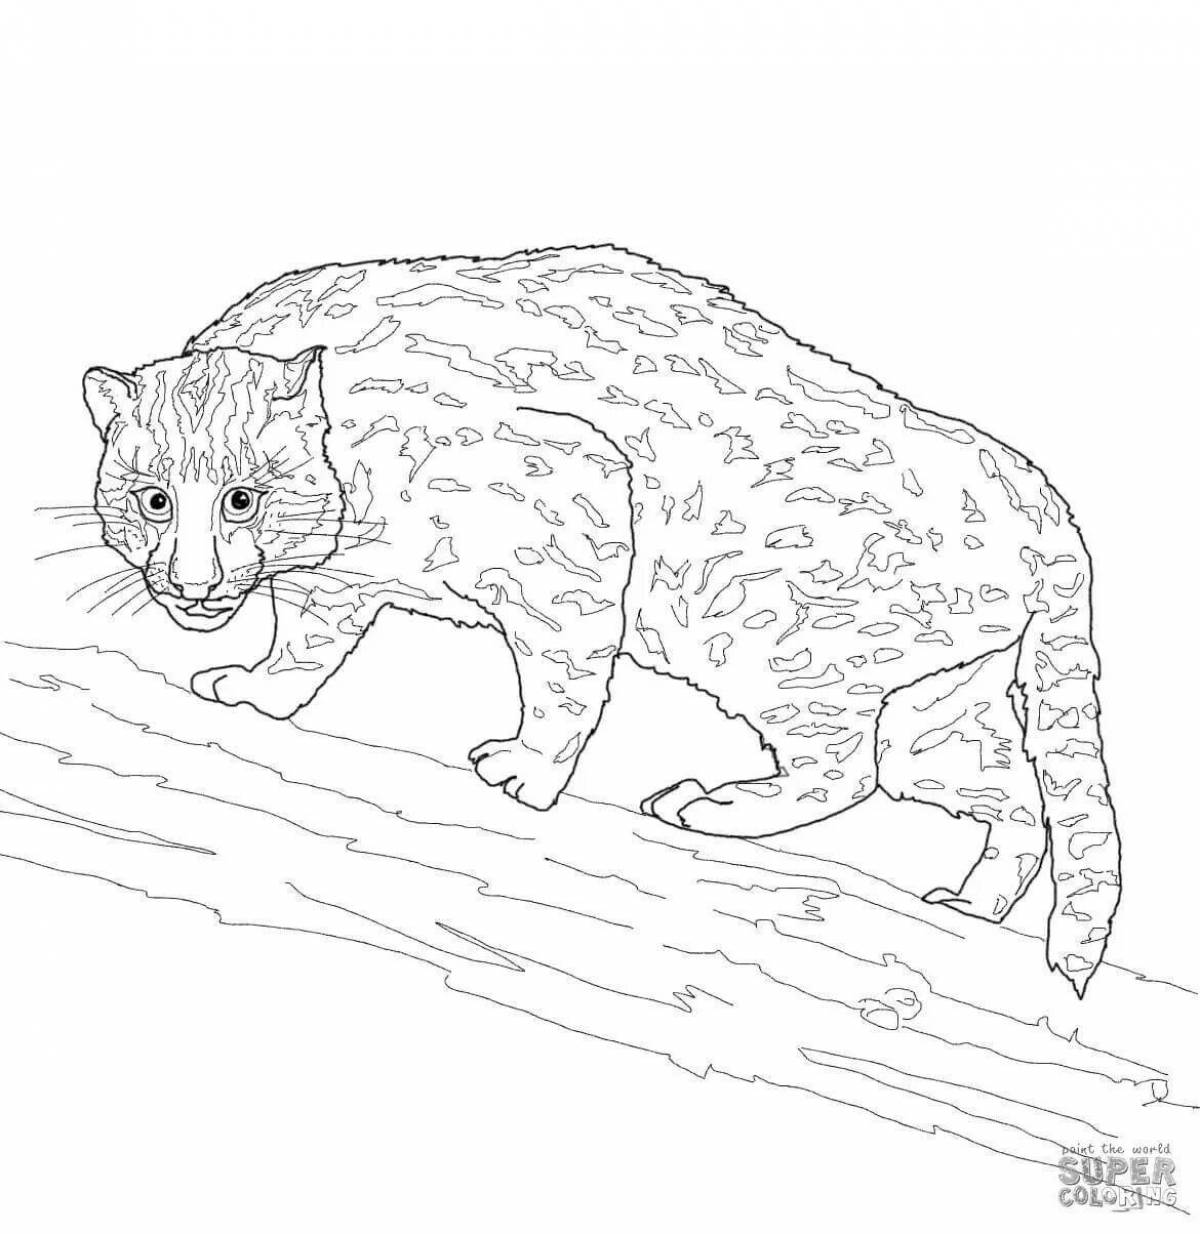 Coloring book colorful Caucasian forest cat